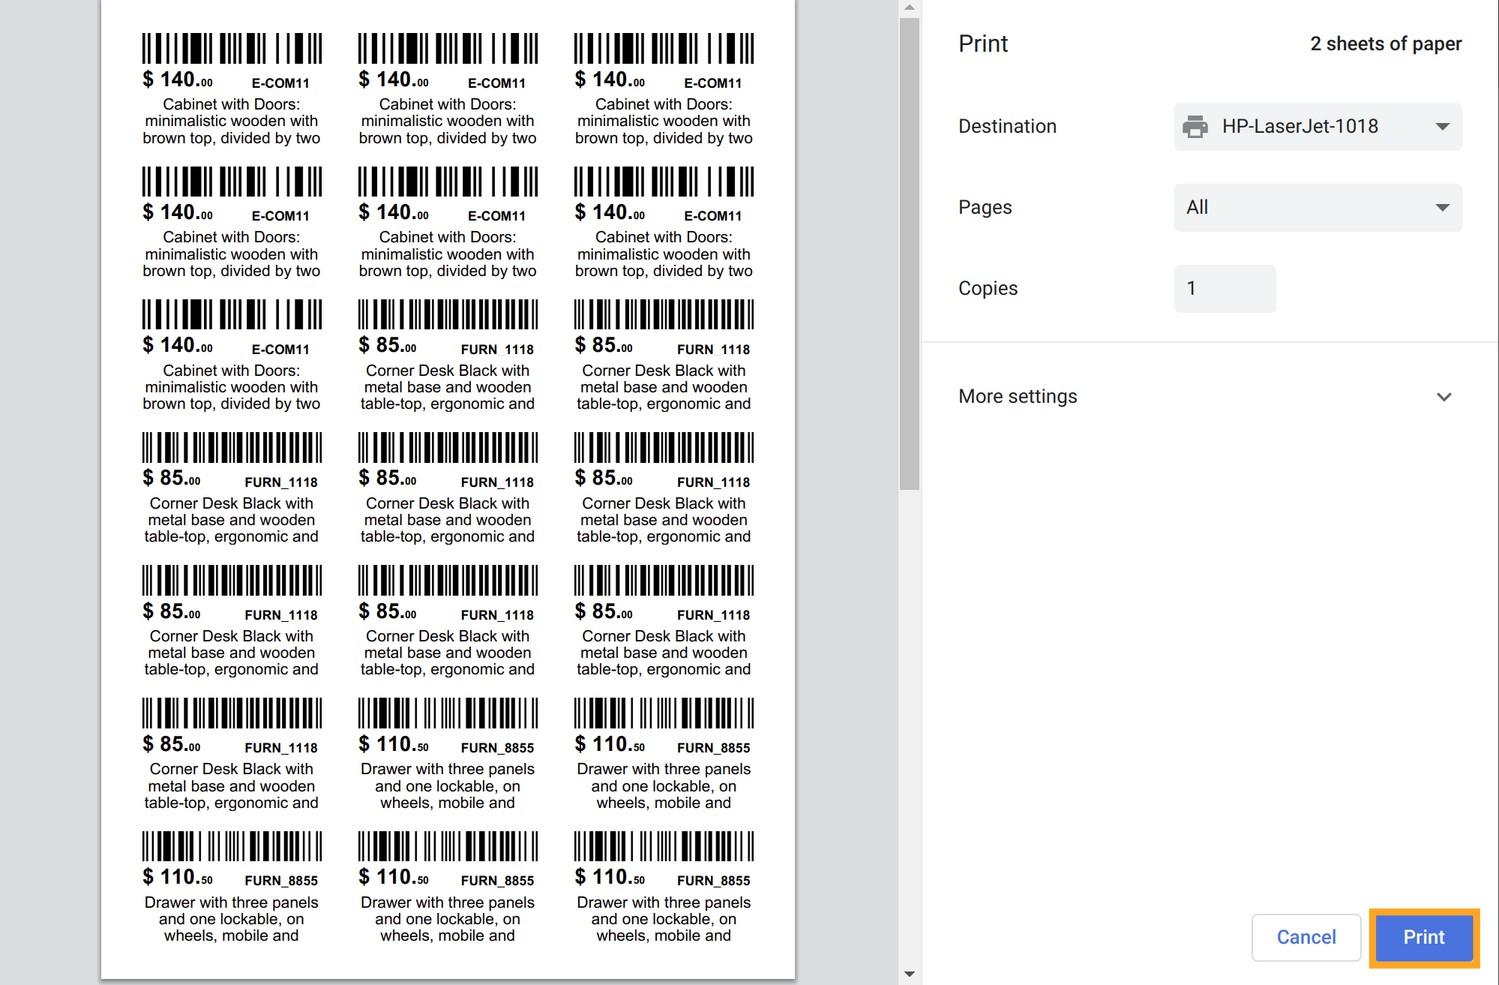 17.0 odoo label printing directly